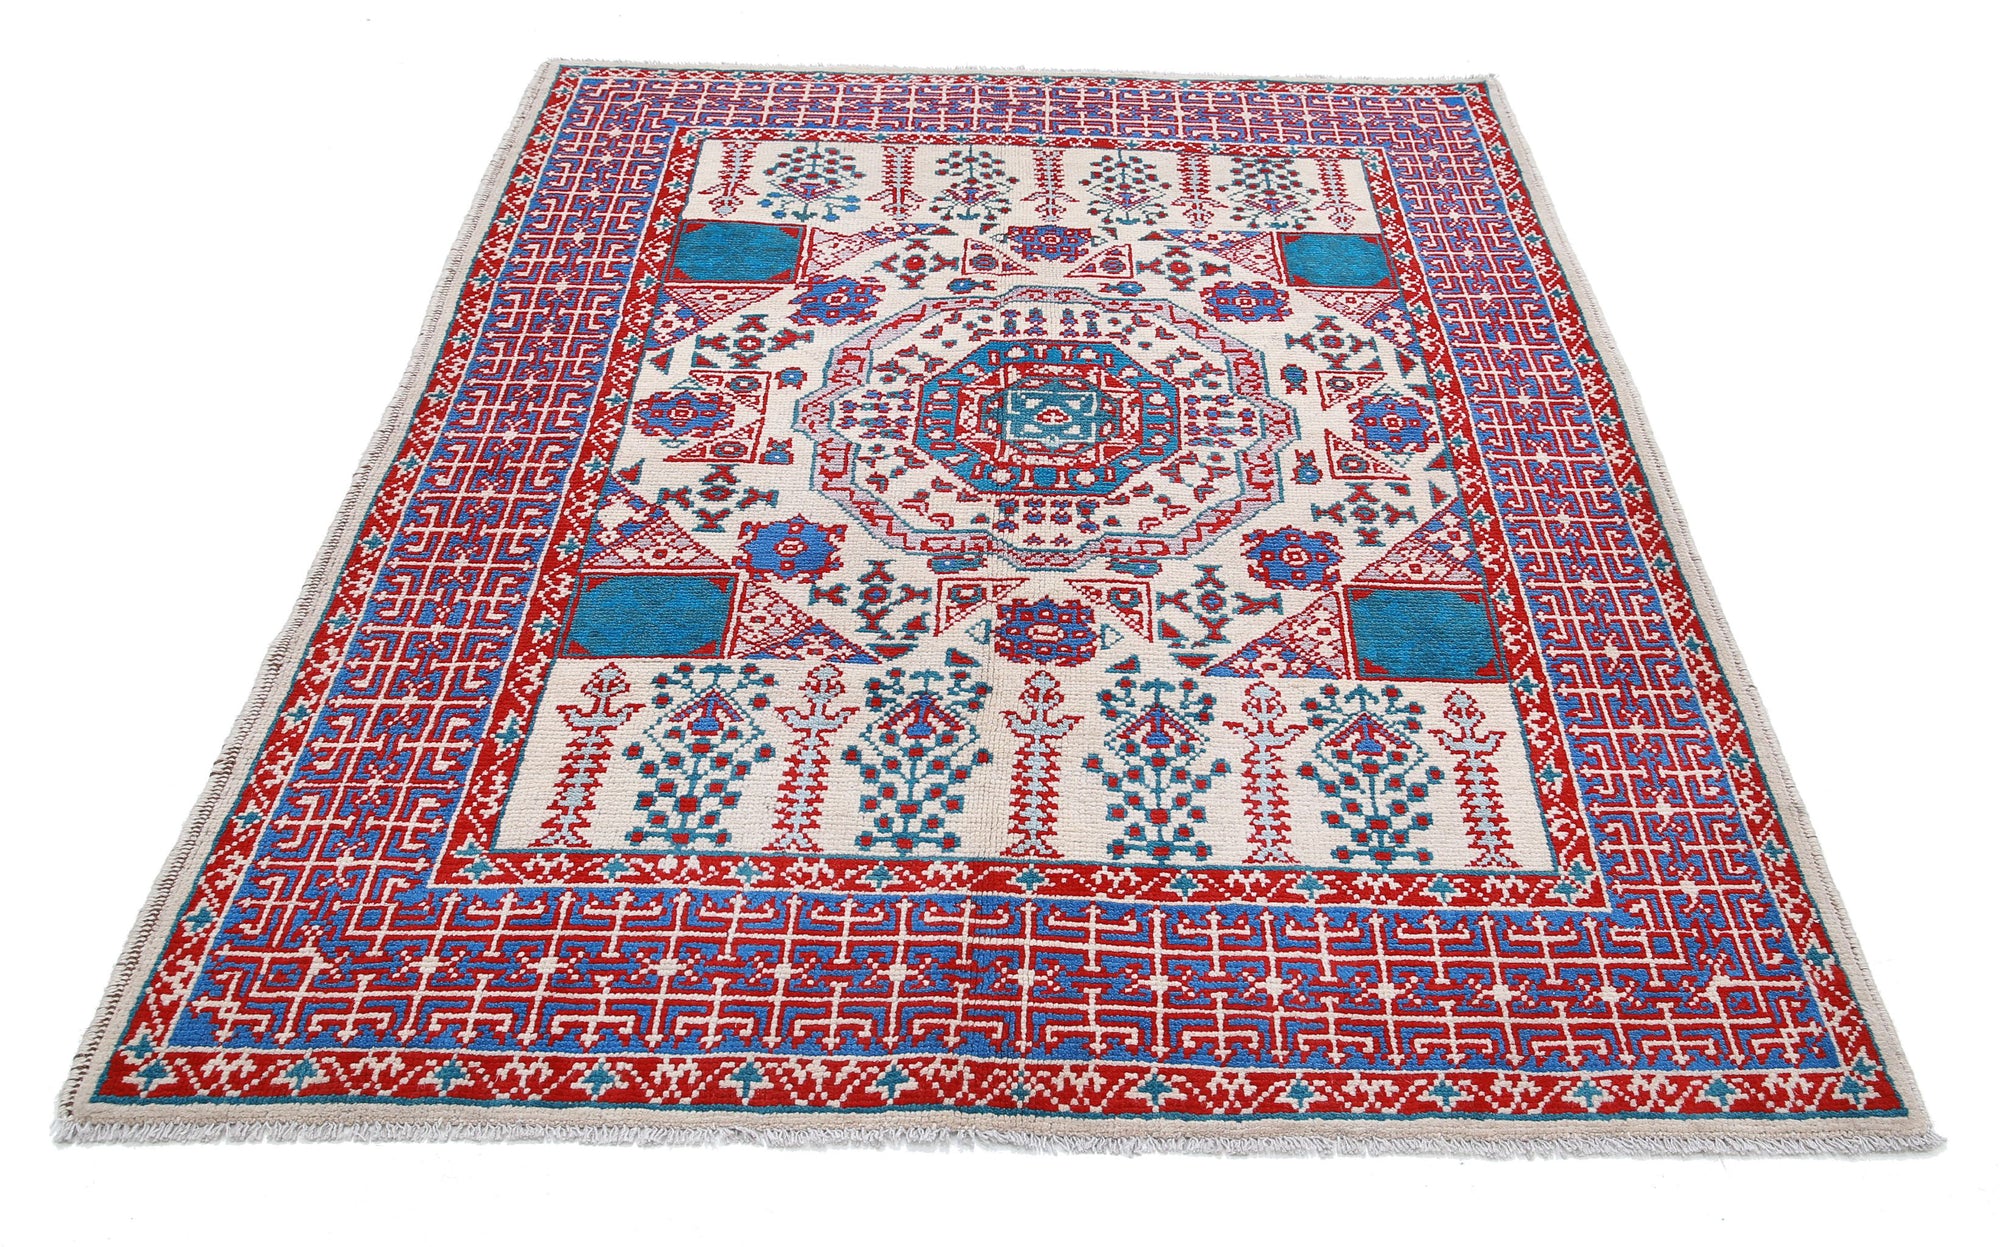 Revival-hand-knotted-qarghani-wool-rug-5014095-3.jpg